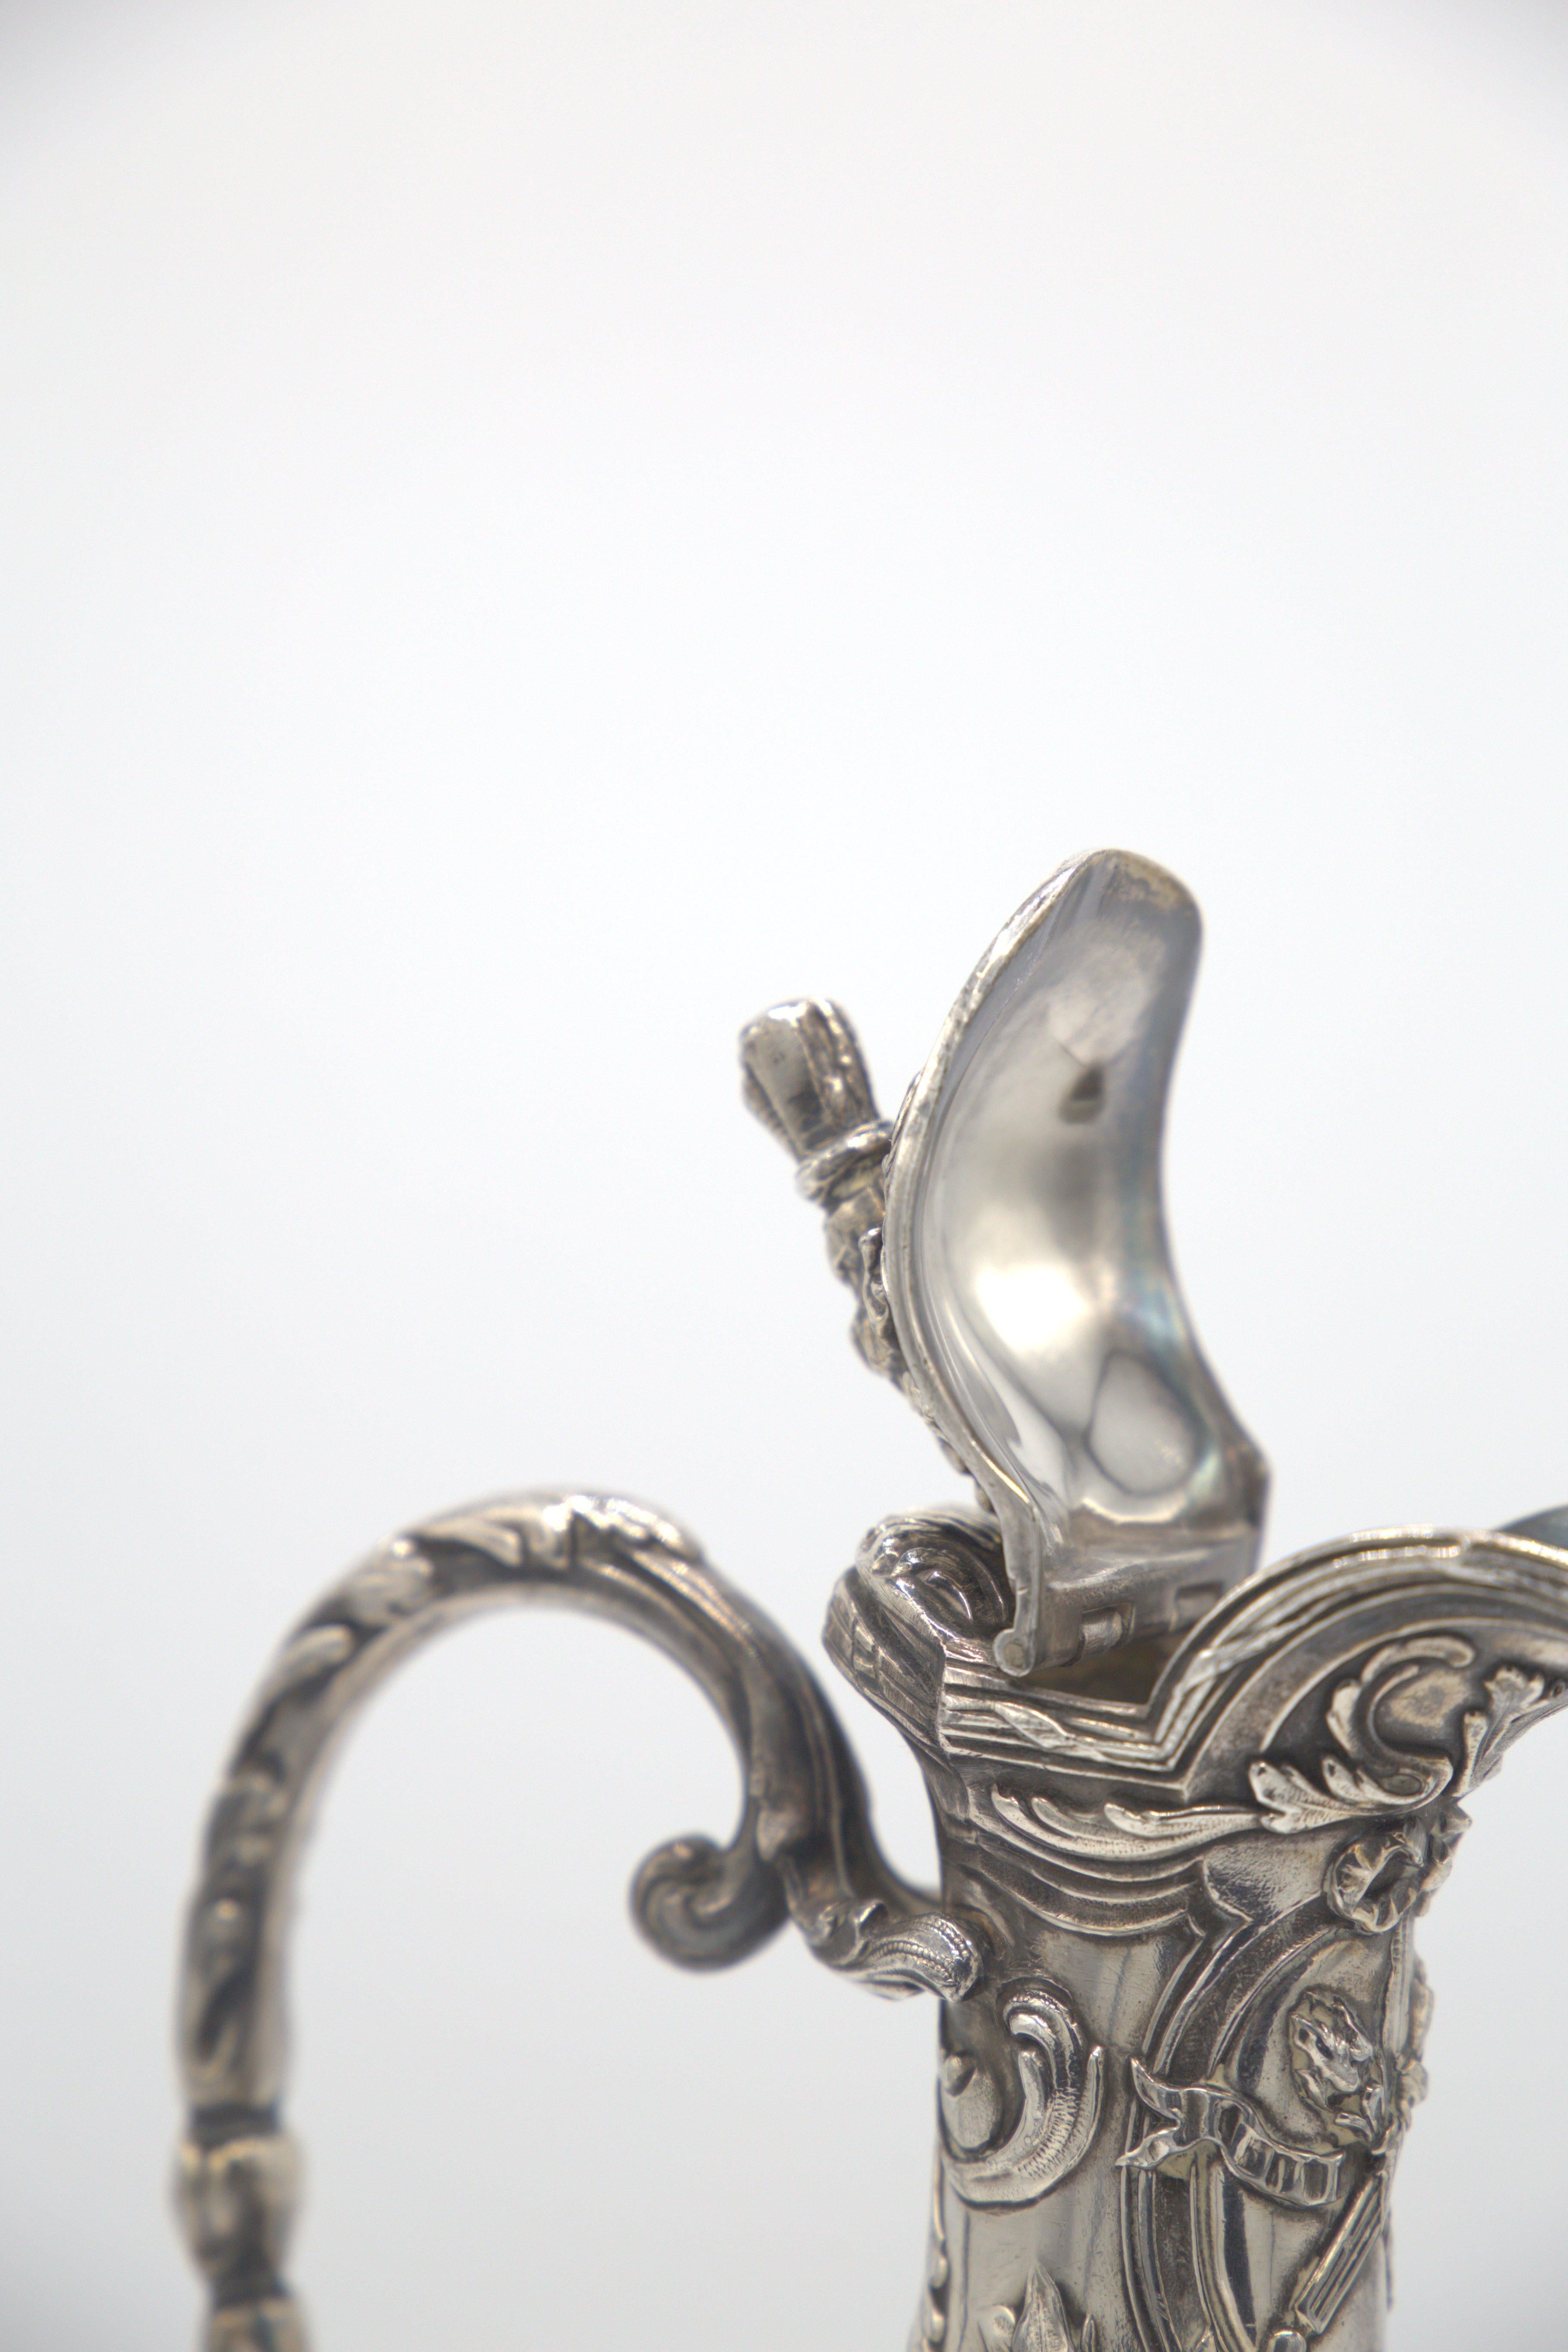 Italian Vintage Pitcher in Silver and Crystal by Baracat